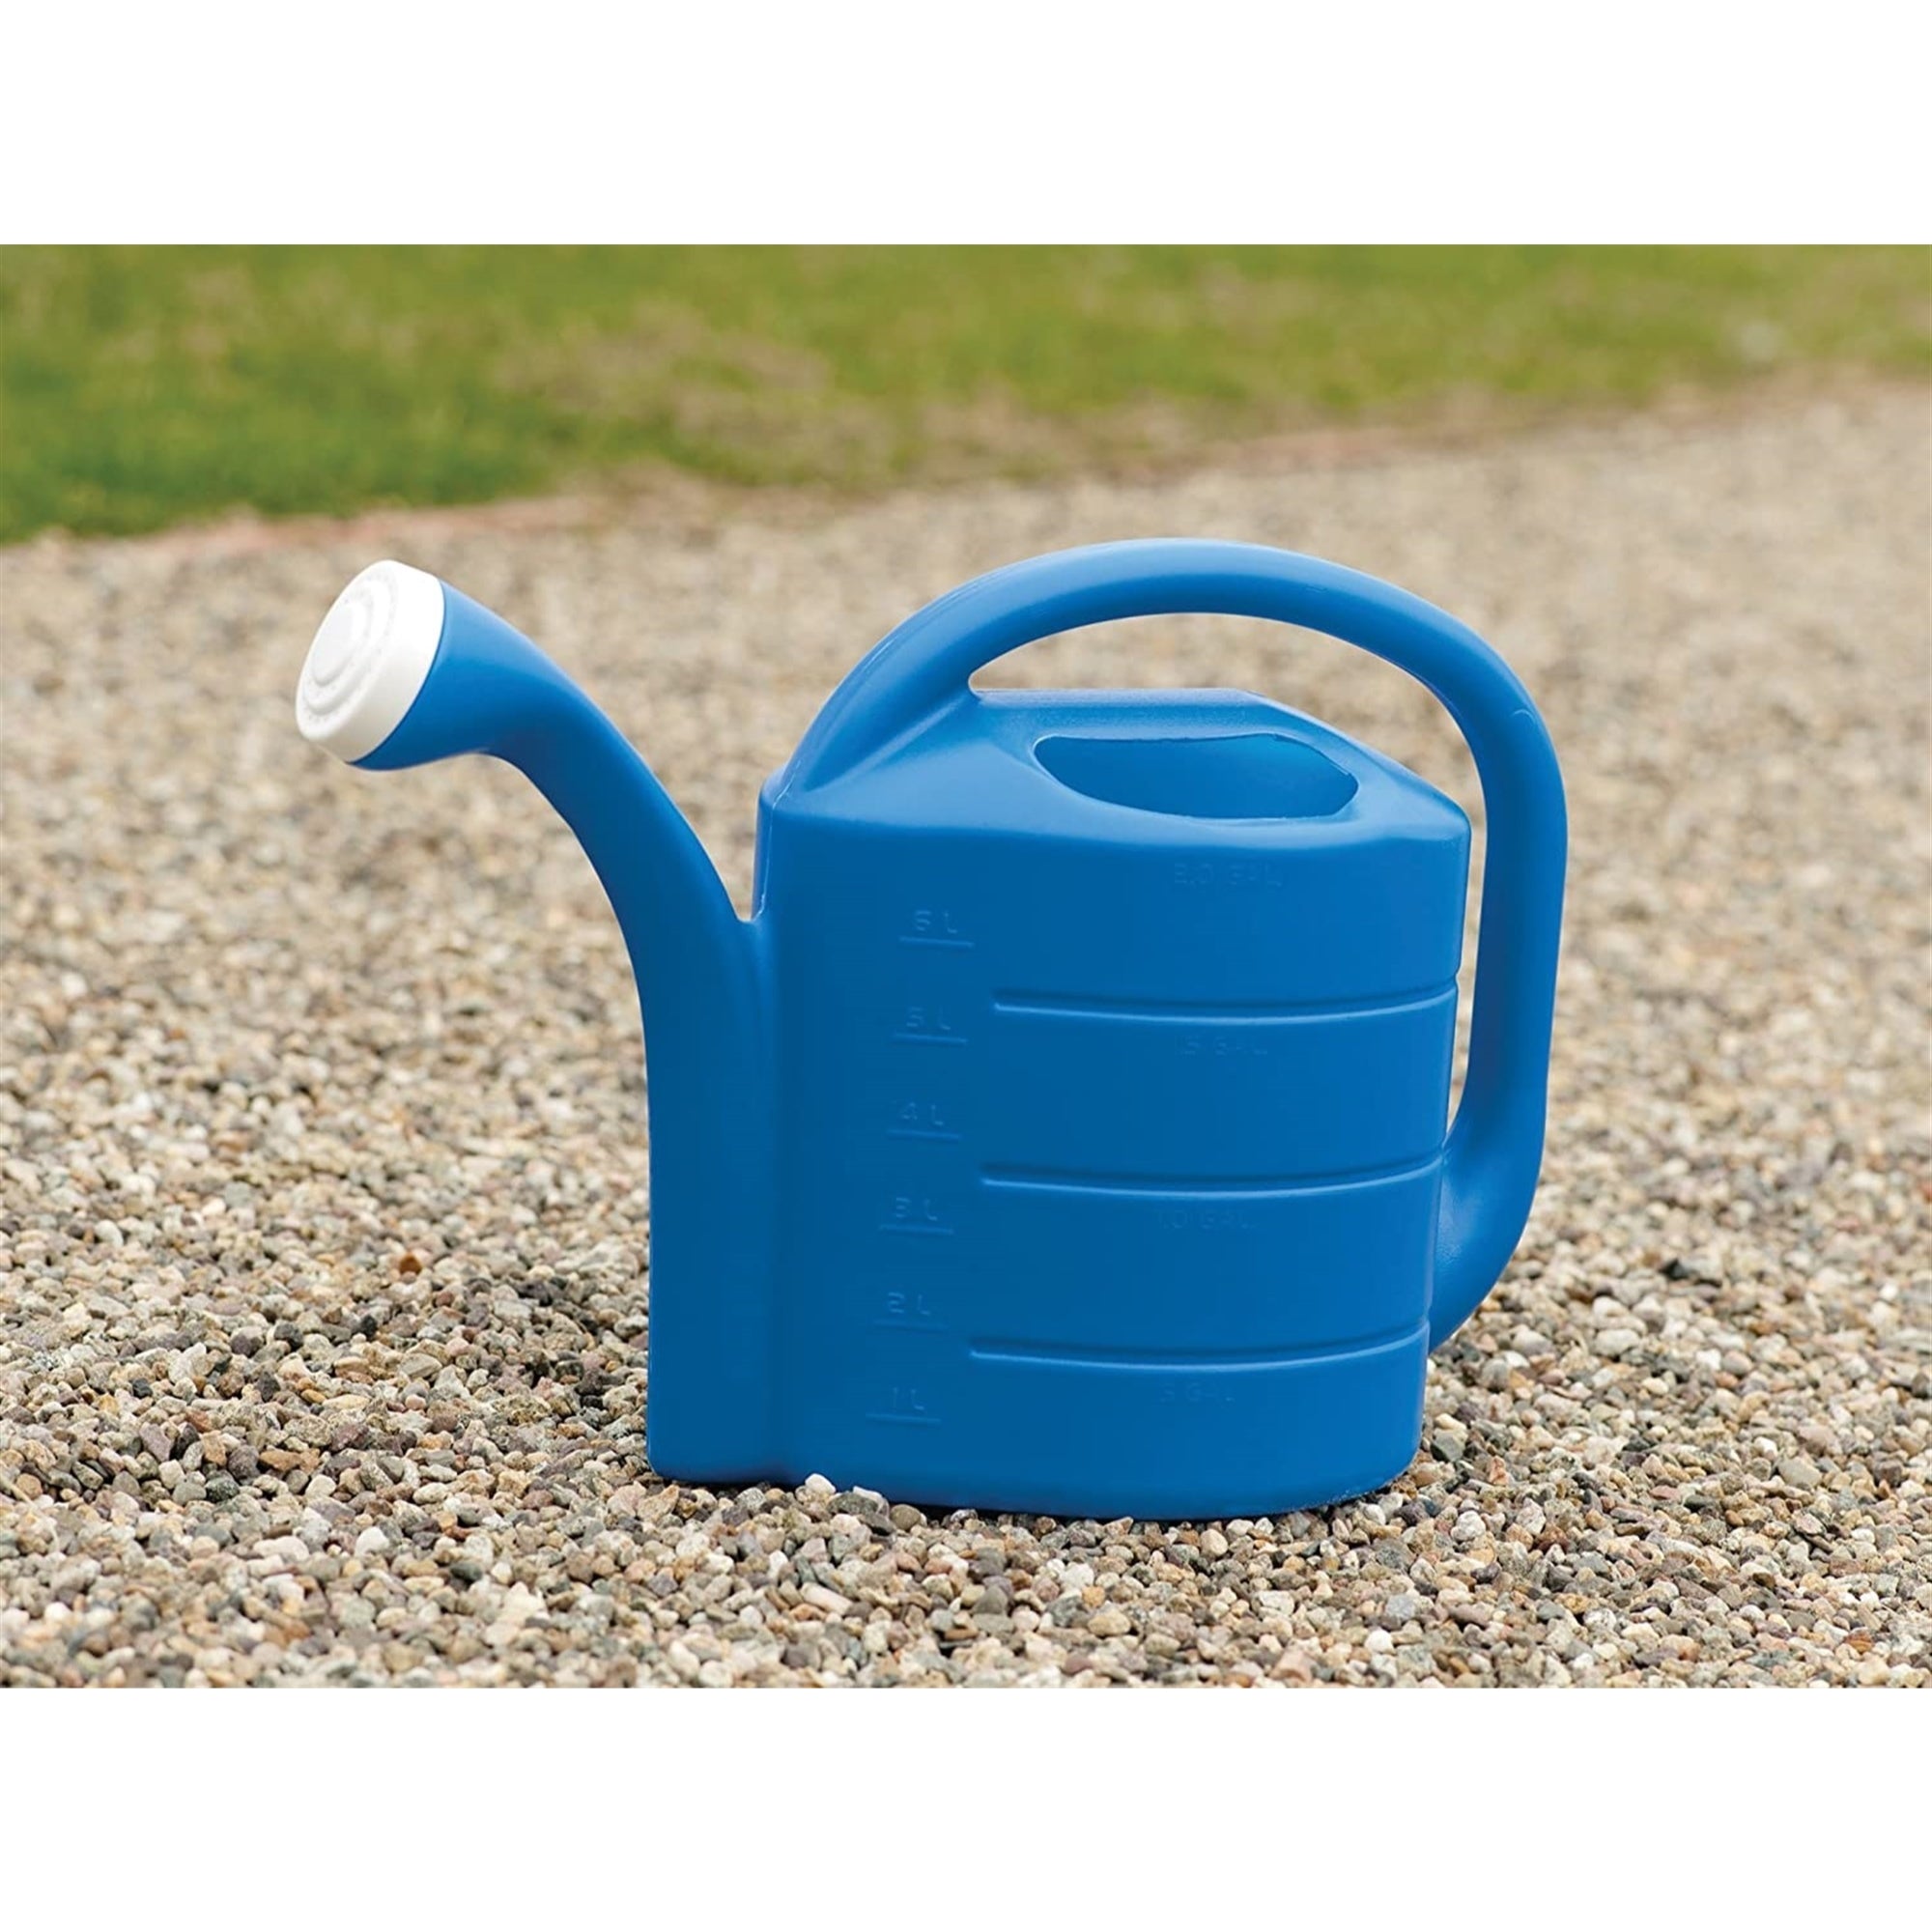 Novelty Deluxe Plastic Watering Can, Bright Blue, 2 Gallons